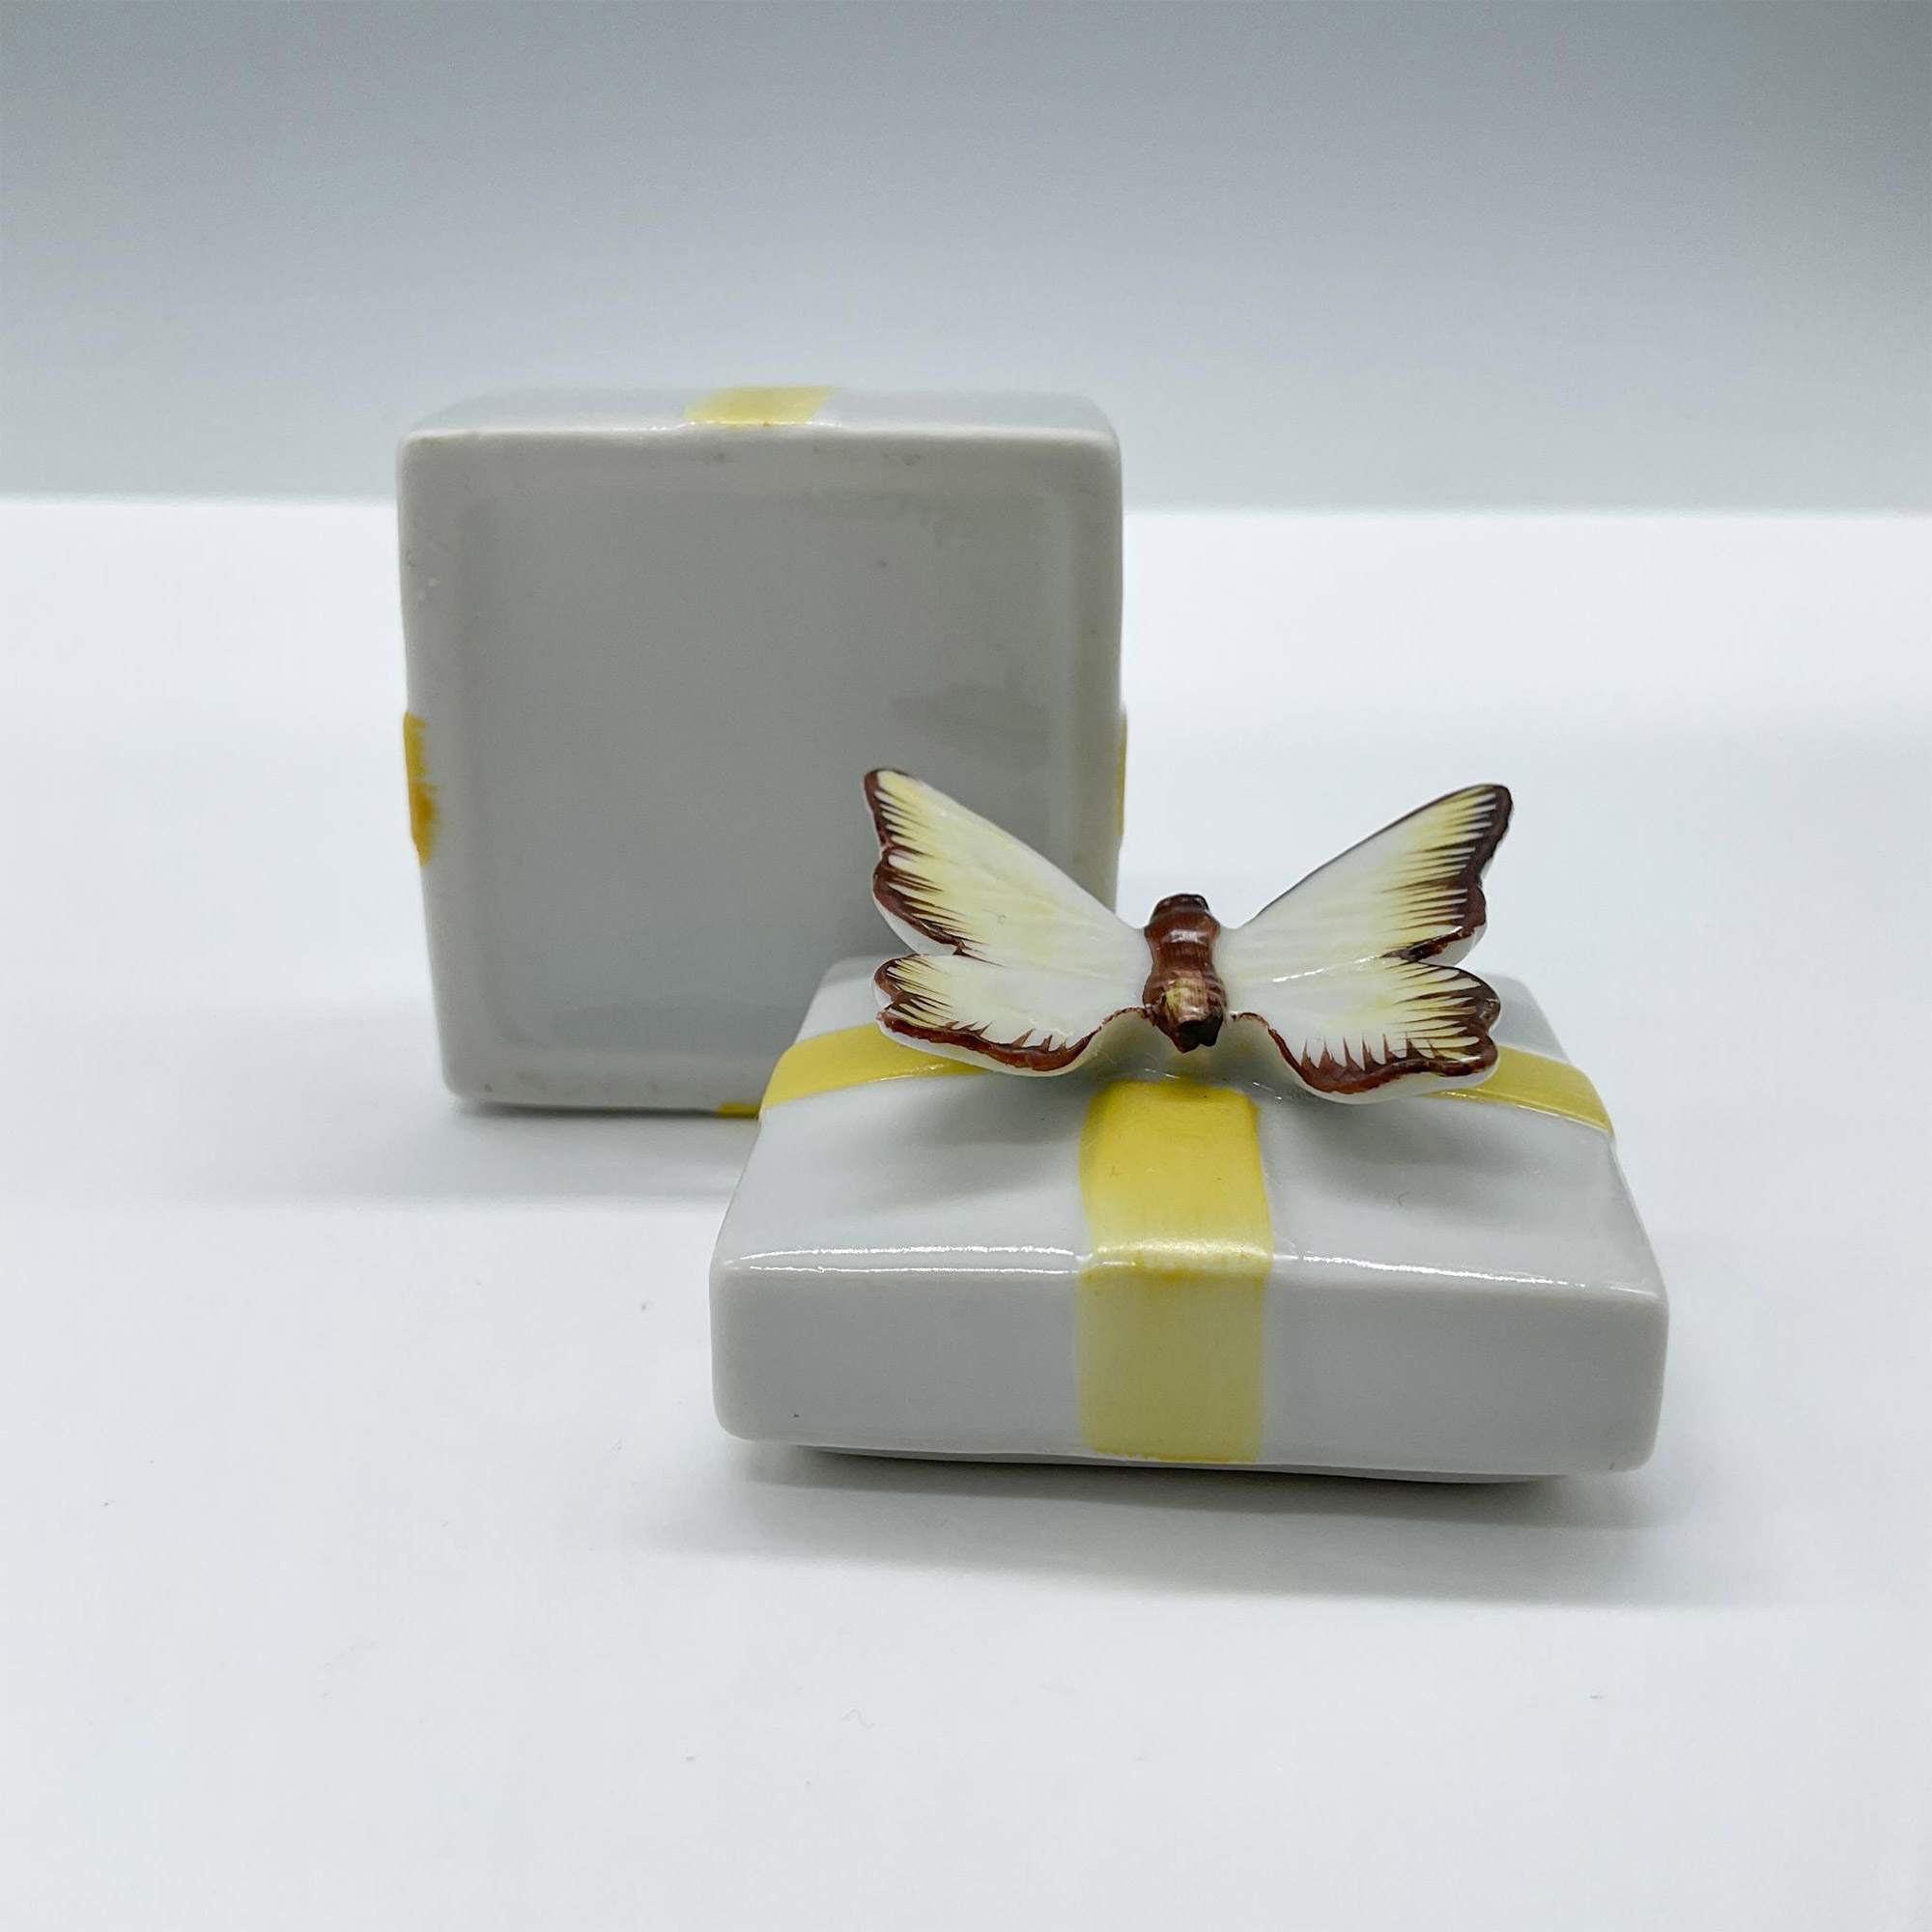 Shafford Lidded Treasure Box, Butterfly - Image 3 of 3